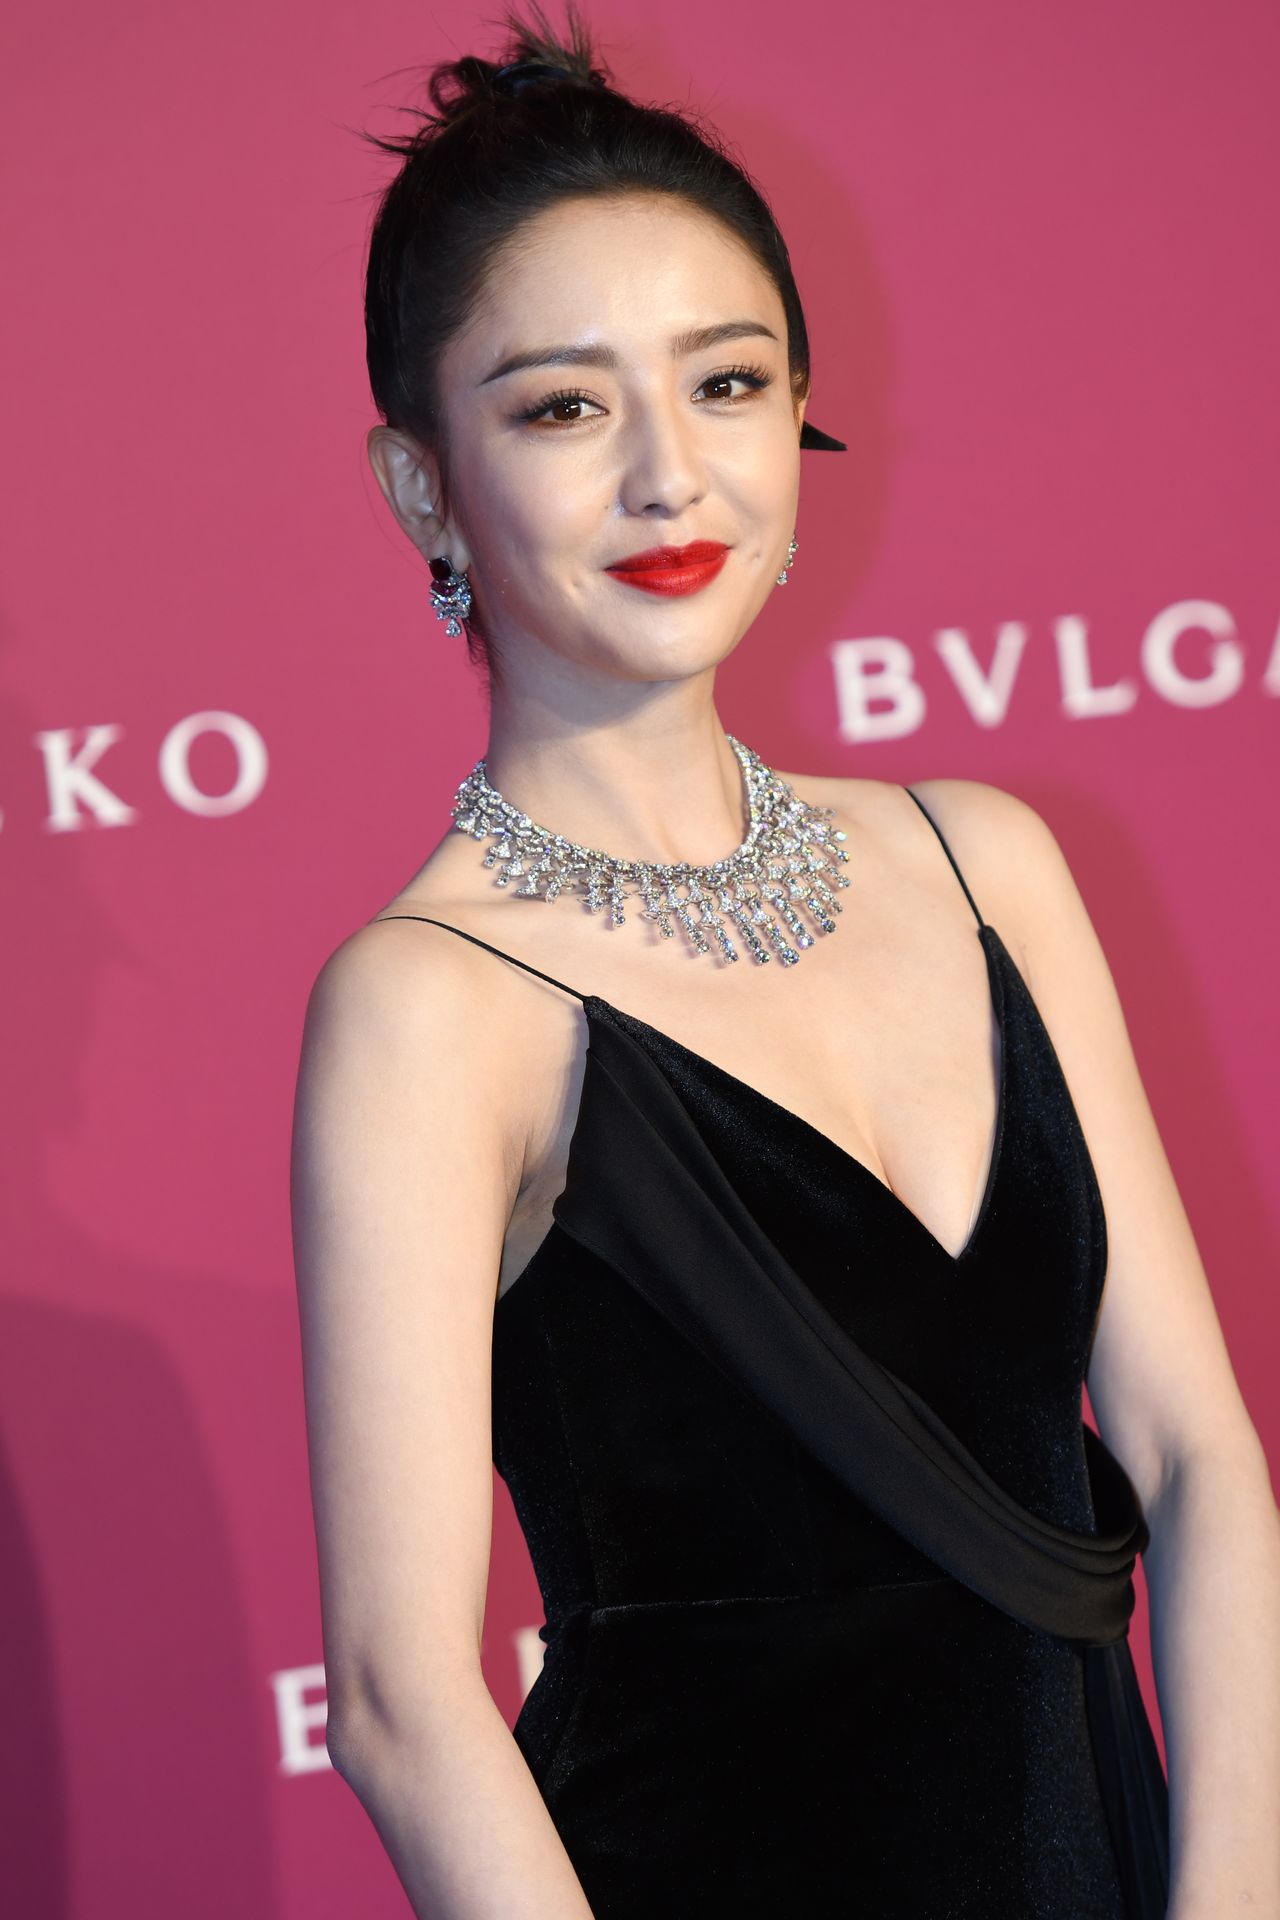 Tong Liya Shows Off Her Cleavage the Bulgari Event (
27 Photos)